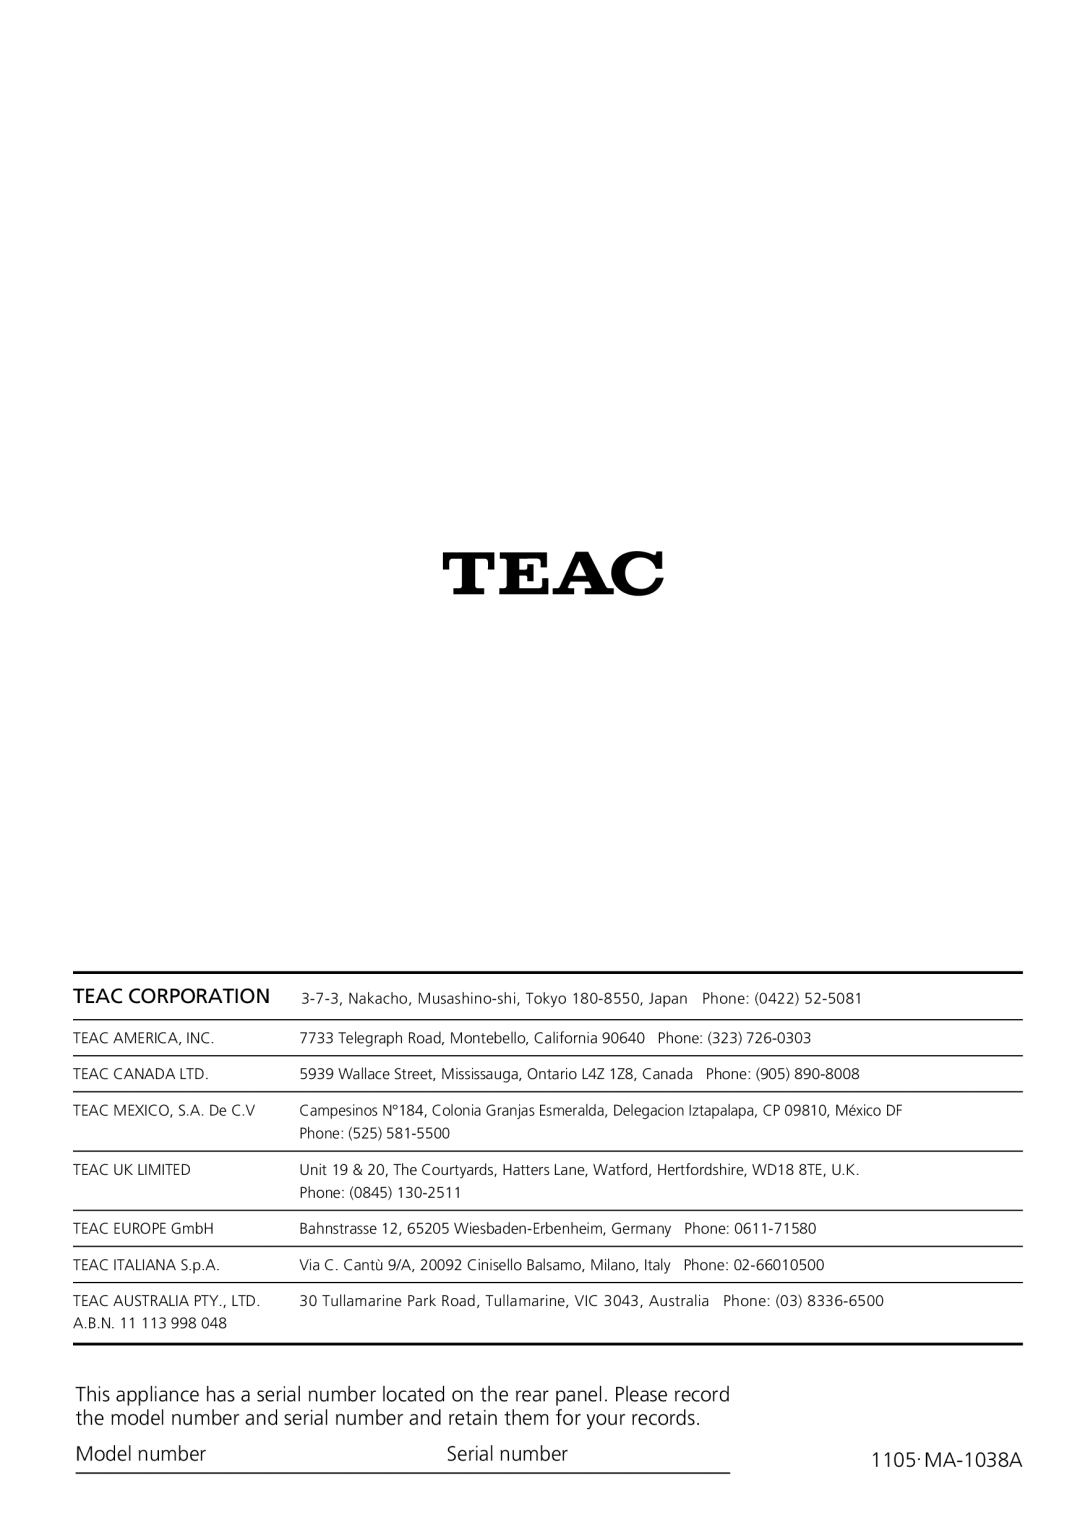 Teac R-3 owner manual Teac Corporation, Model number, Serial number, MA-1038A 